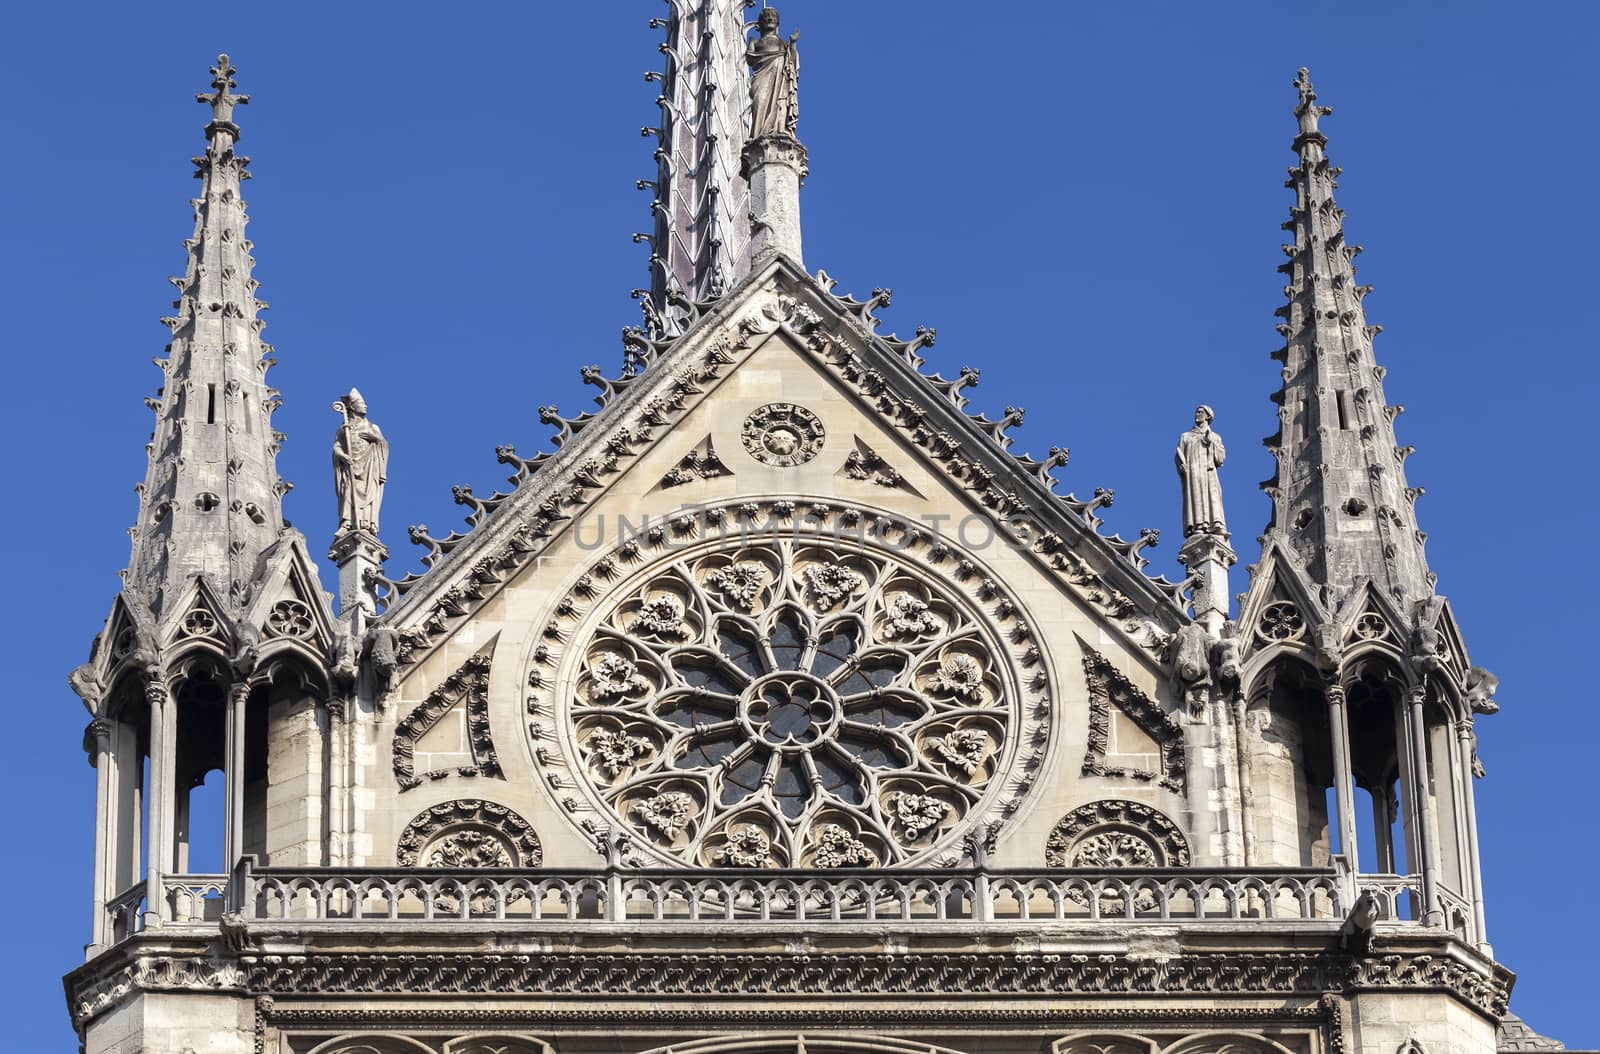 Southern part of transept of Notre Dame cathedral in Paris